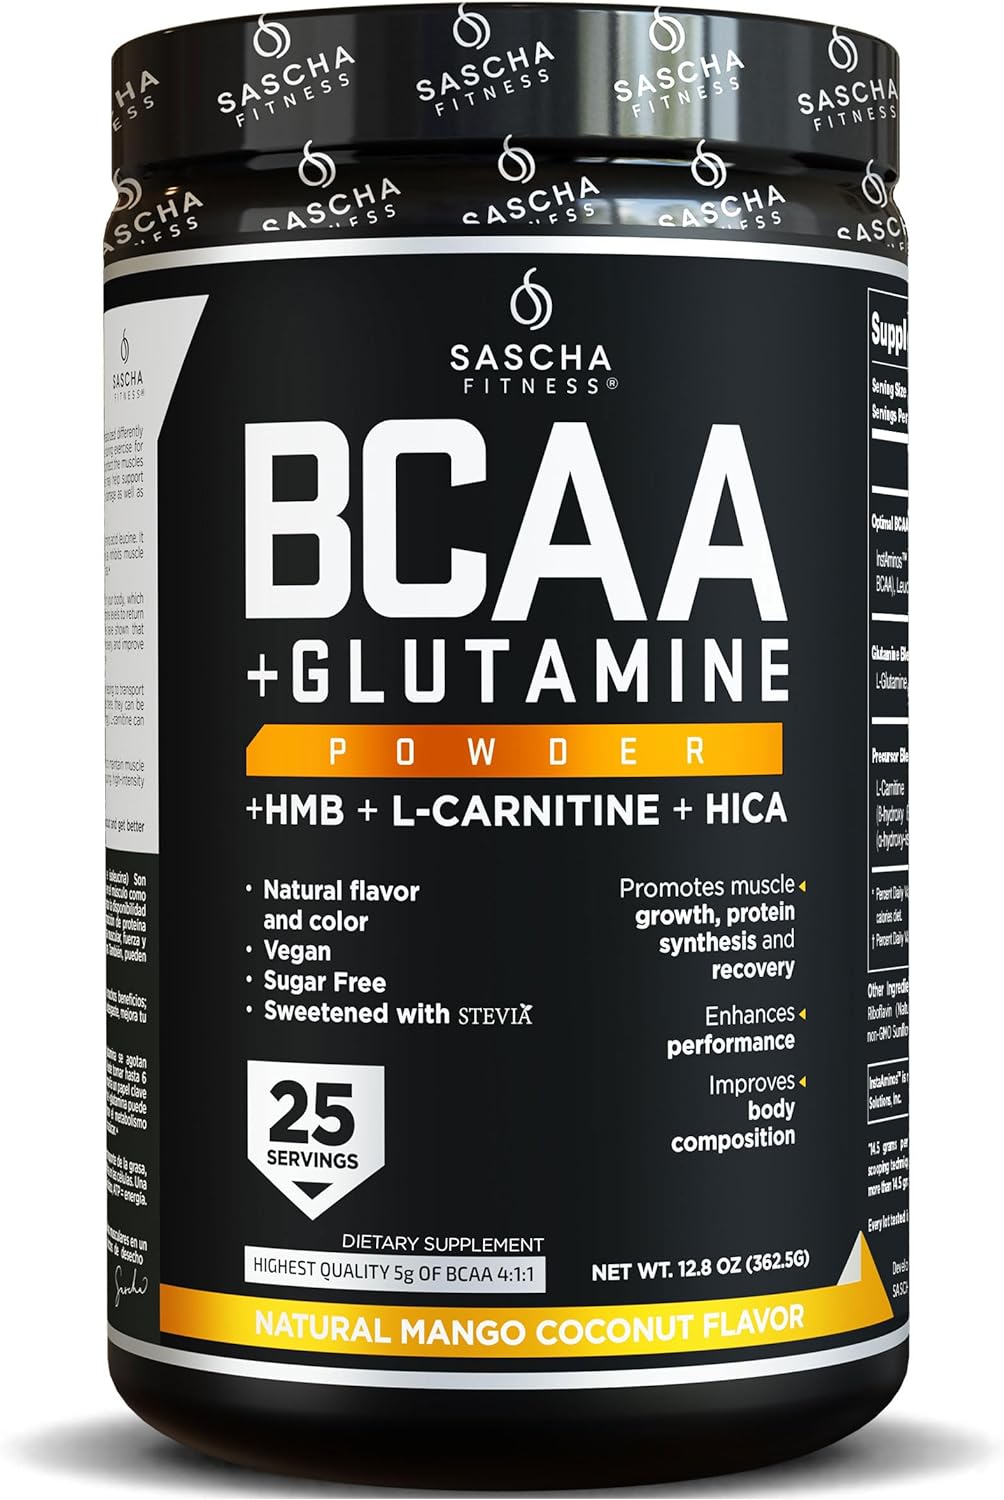 Sascha Fitness BCAA 4:1:1+Glutamine, HMB, L-Carnitine, HICA|Powerful and Instant Powder Blend with Branched Chain Amino Acids(BCAAs)for Pre, Intra and Post-Workout,Natural Mango Coconut Flavor,362.5g